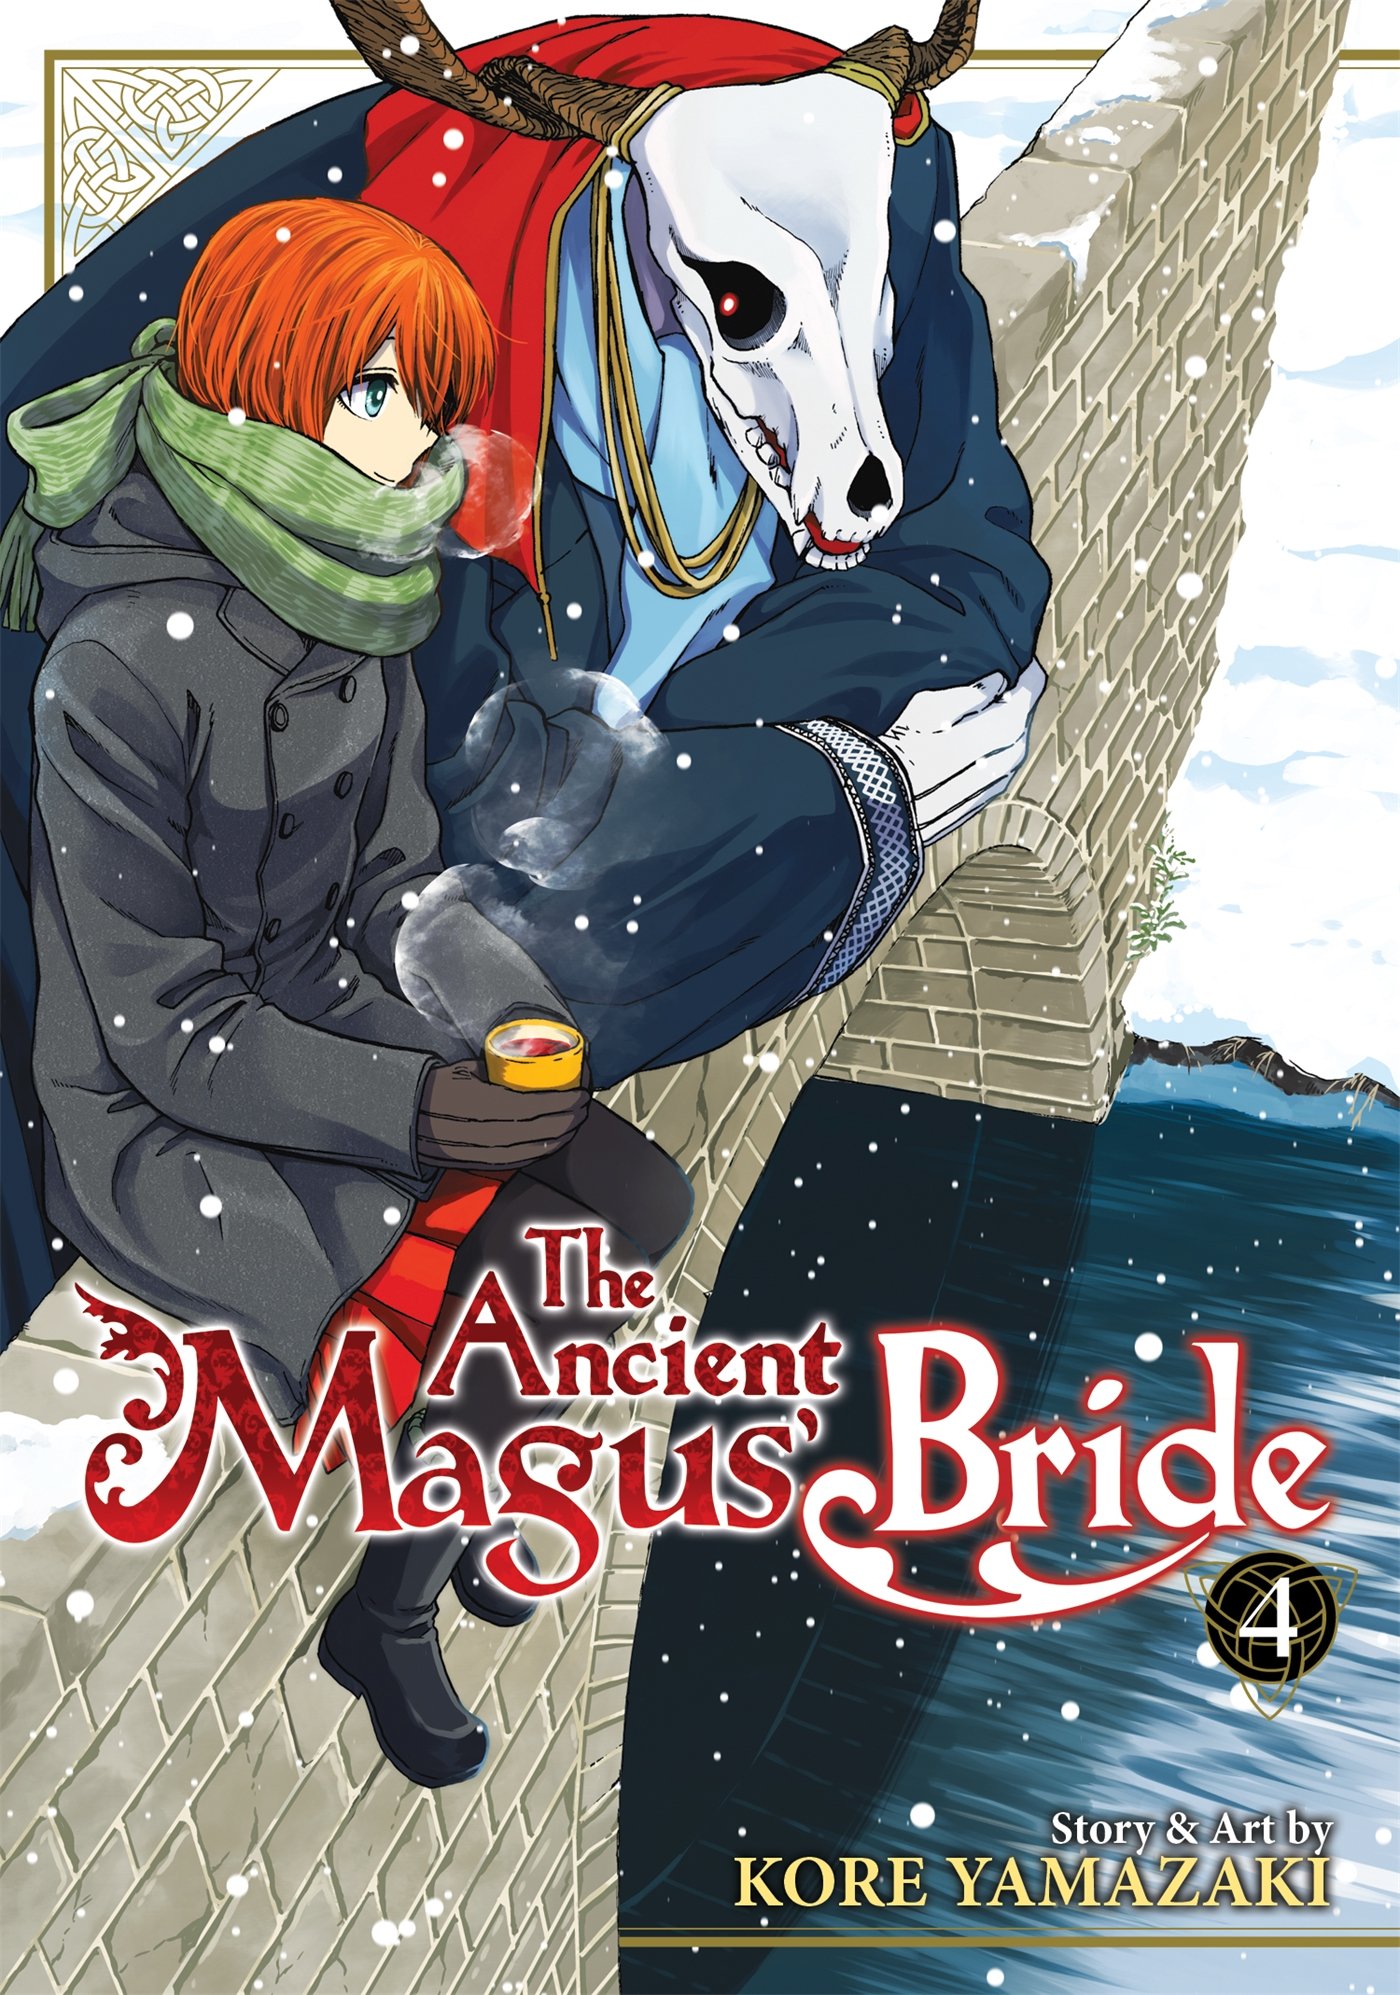 The Ancient Magus' Bride #6